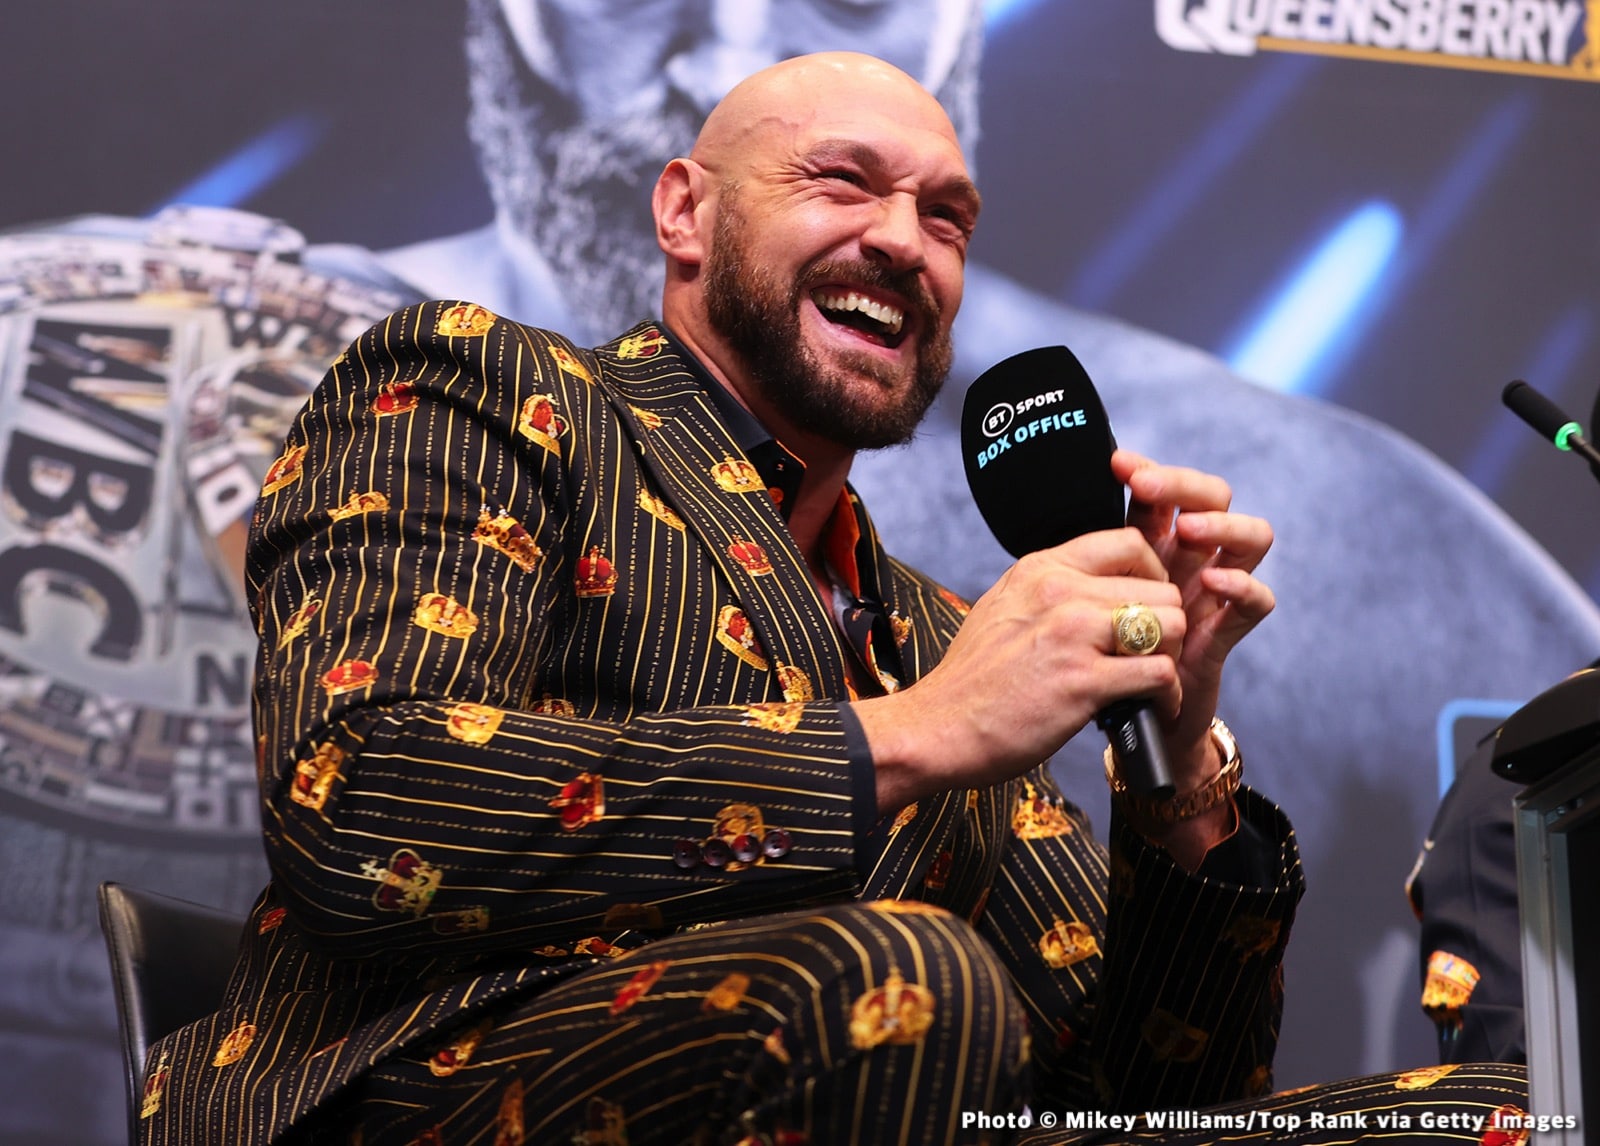 Tony Bellew says Tyson Fury's judgments are that of a "Lunatic"